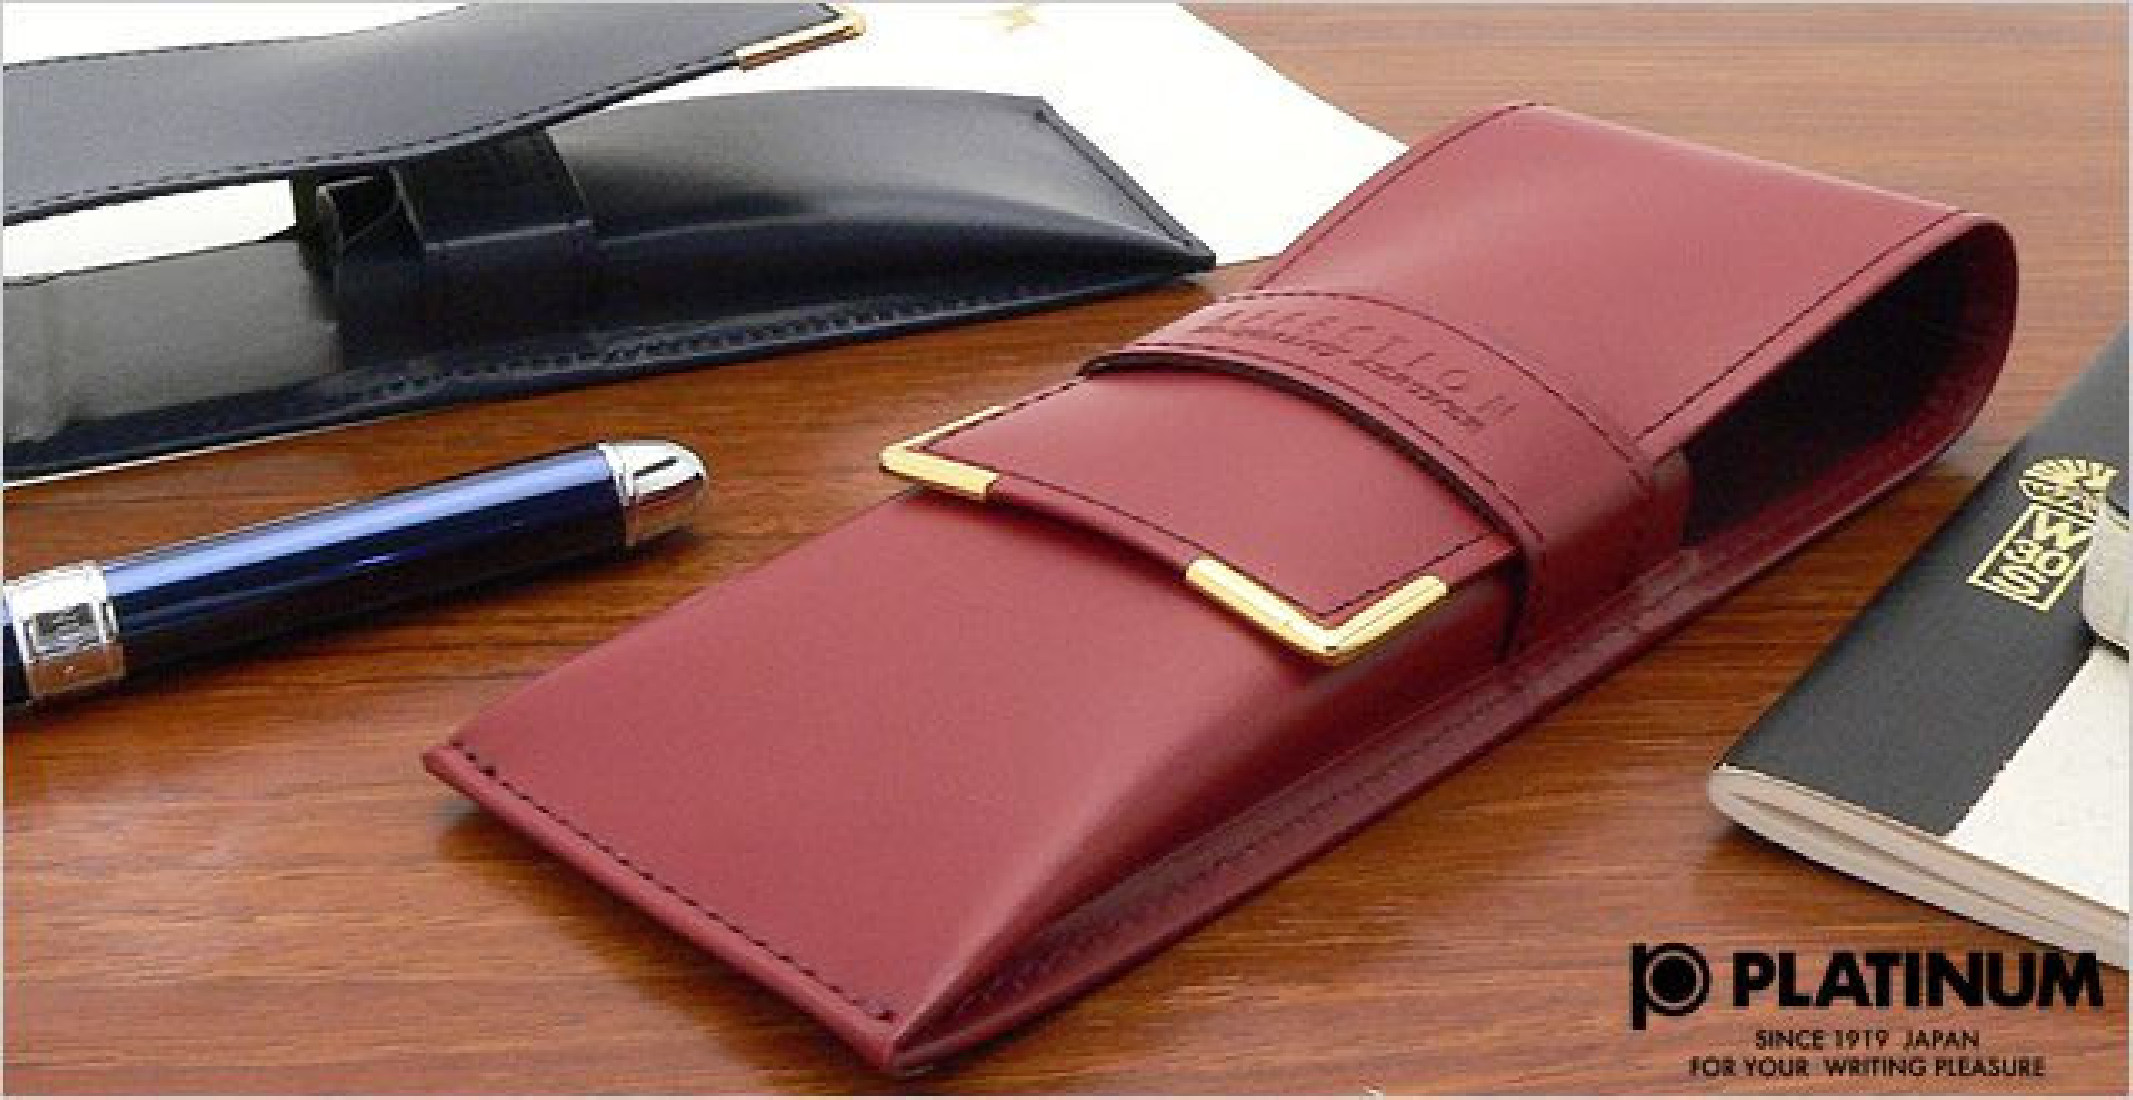 Platinum leather case for 3 pens with flap HPCS-3000